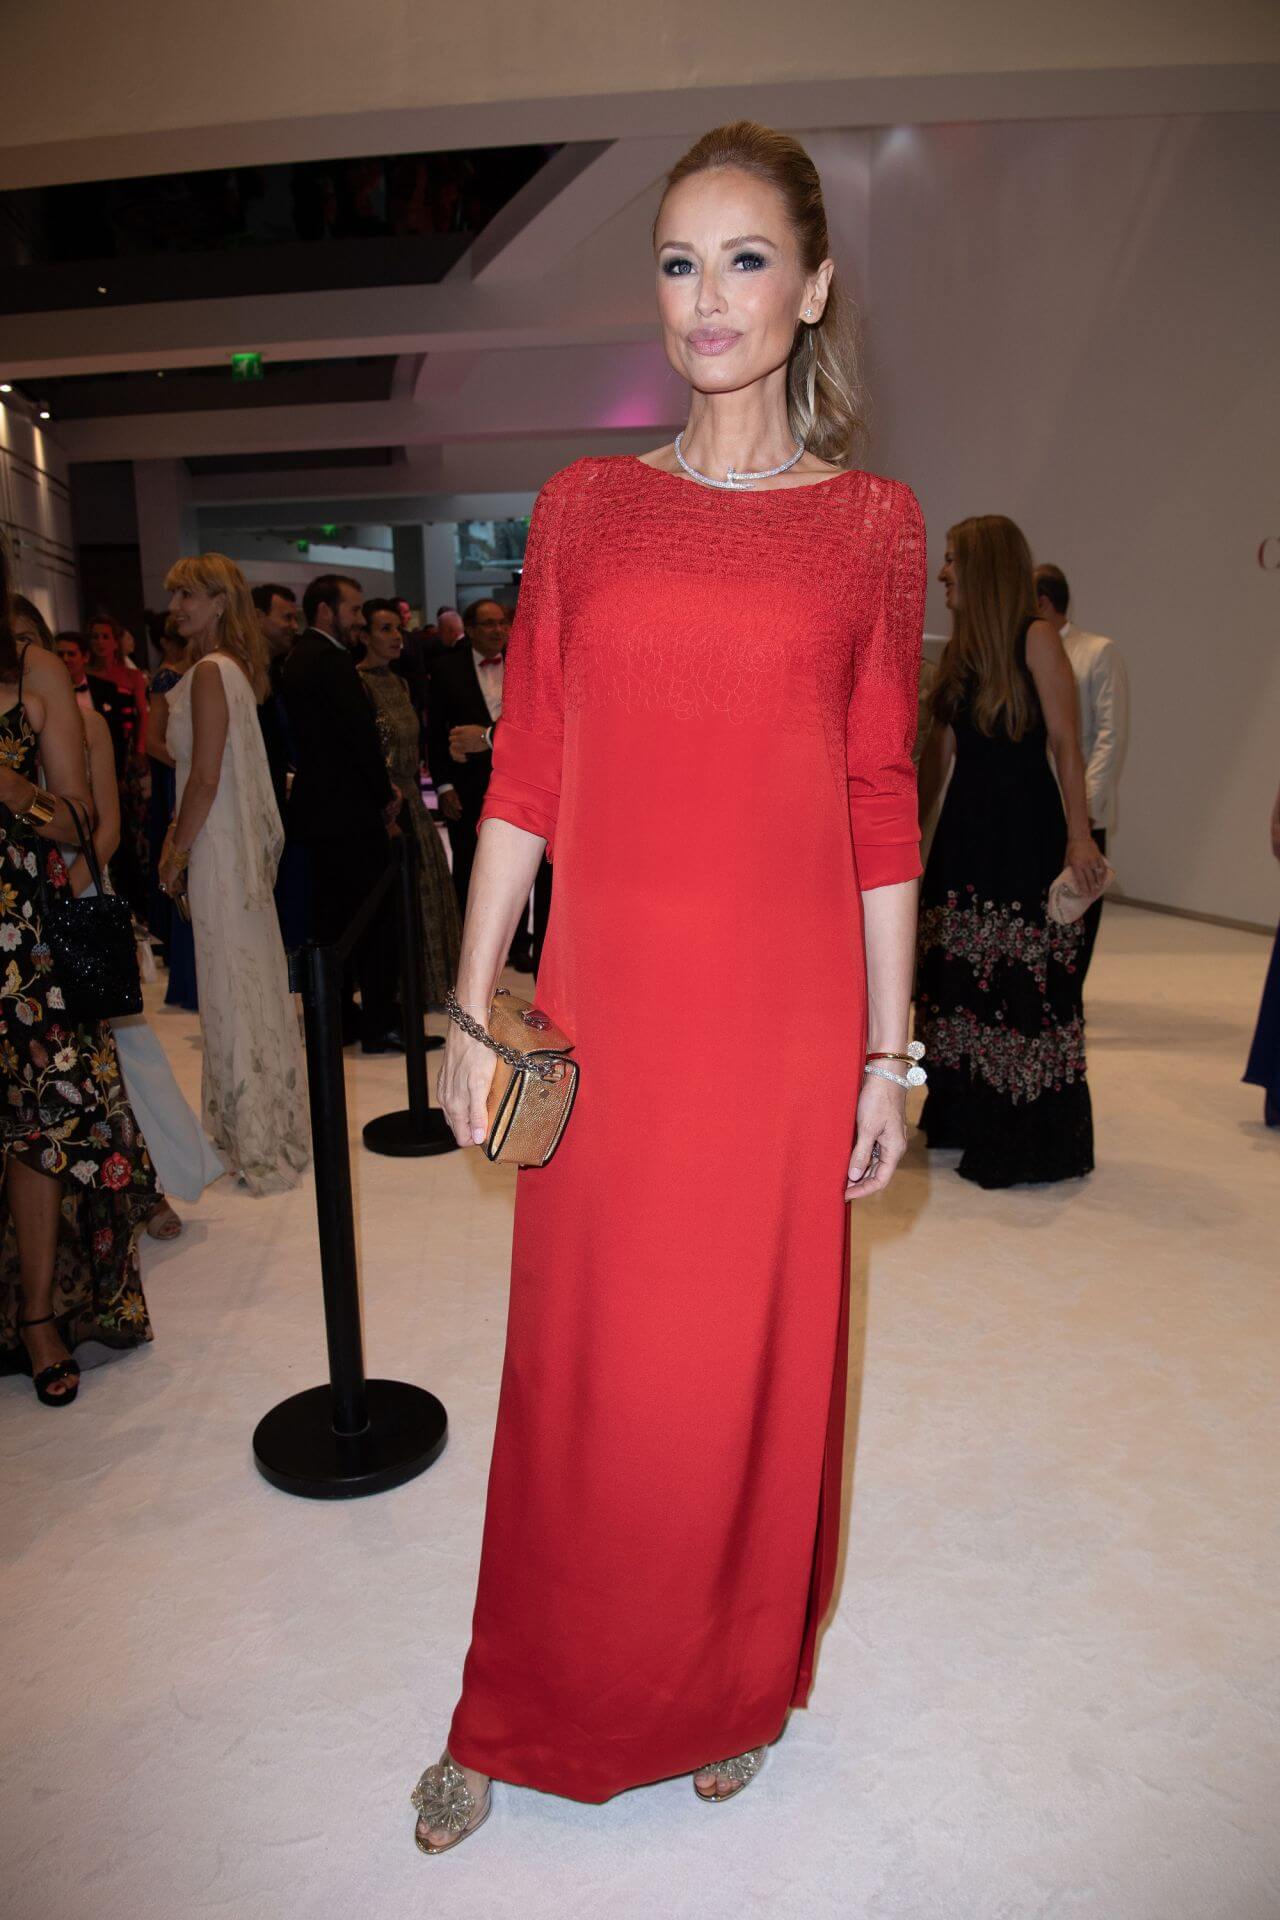 Adriana Karembeu In a Beautiful Red Gown With Pearl Necklace, Bracelet & Brown Leather Clutch